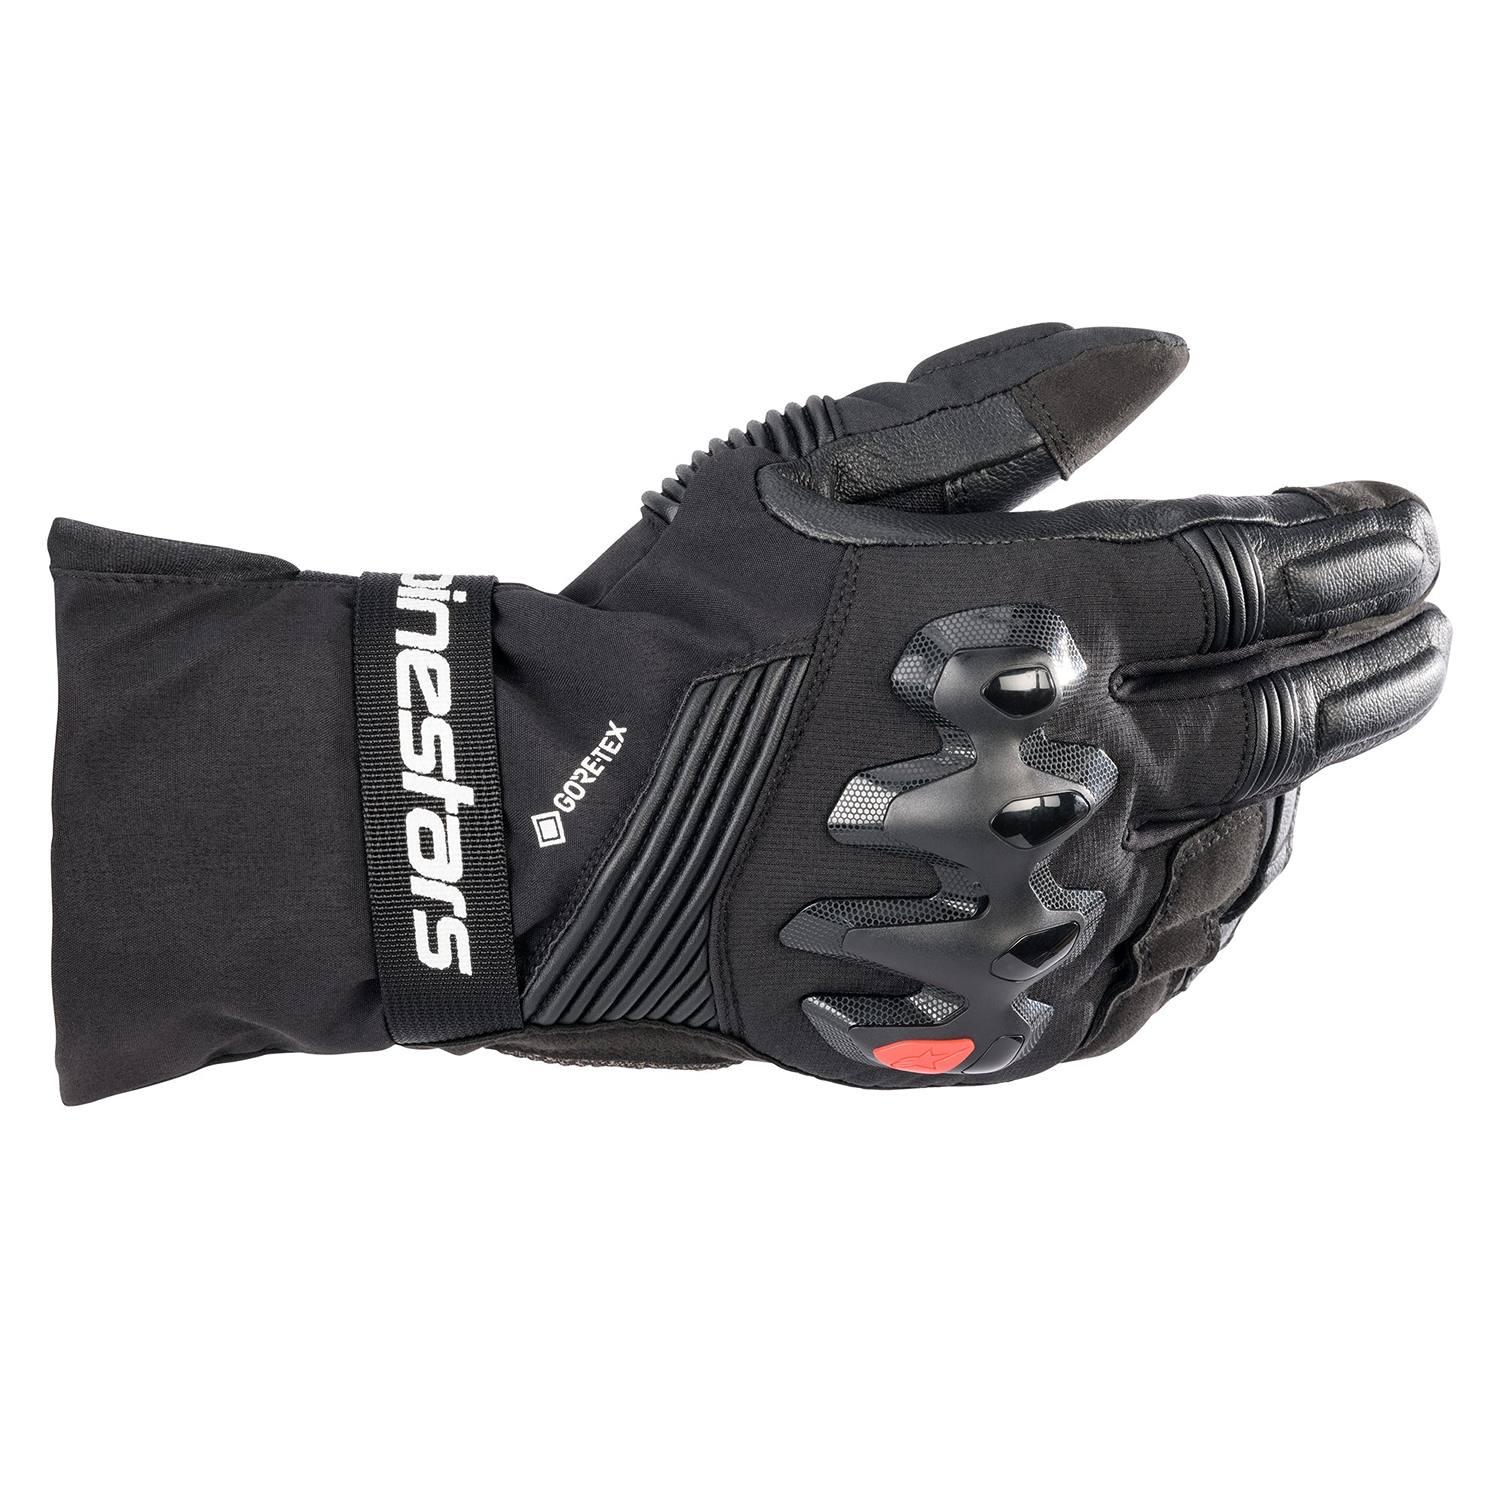 Image of Alpinestars Boulder Gore-Tex® Gloves With Gore Grip Technology Black Size L ID 8059347074528